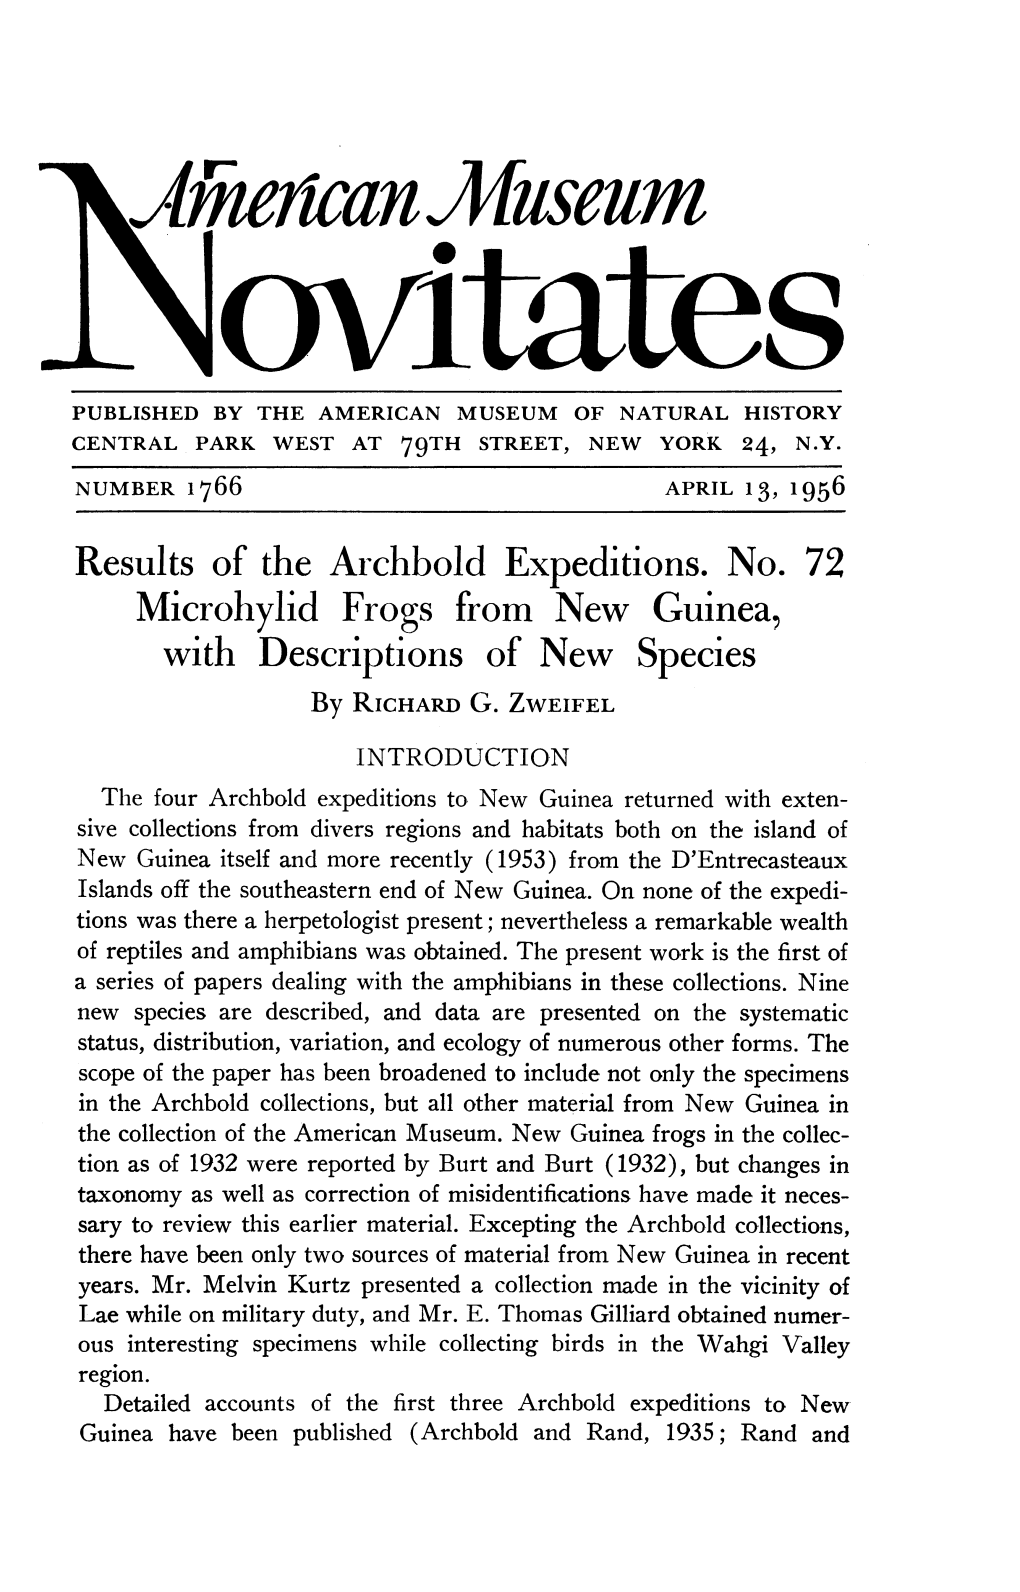 Results of the Archbold Expeditions. No. 72 Microhylid Frogs Fromnew Guinea, with Descriptions of New Species